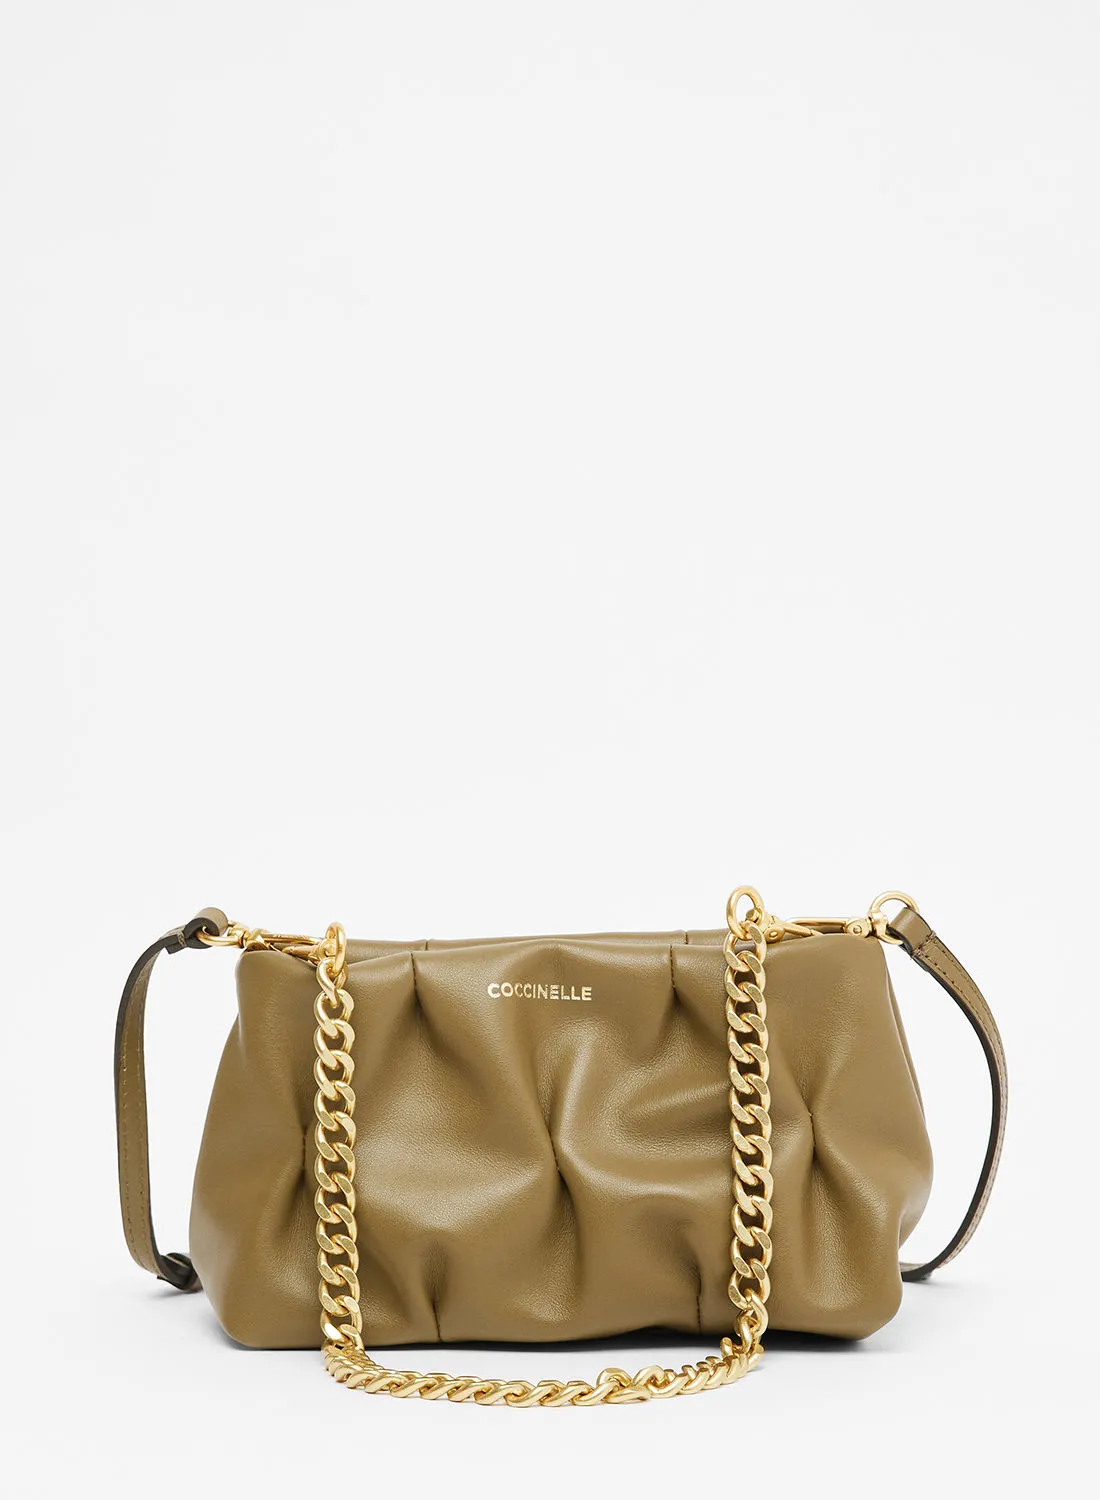 COCCINELLE Ophelie Goodie Leather Shoulder Bag